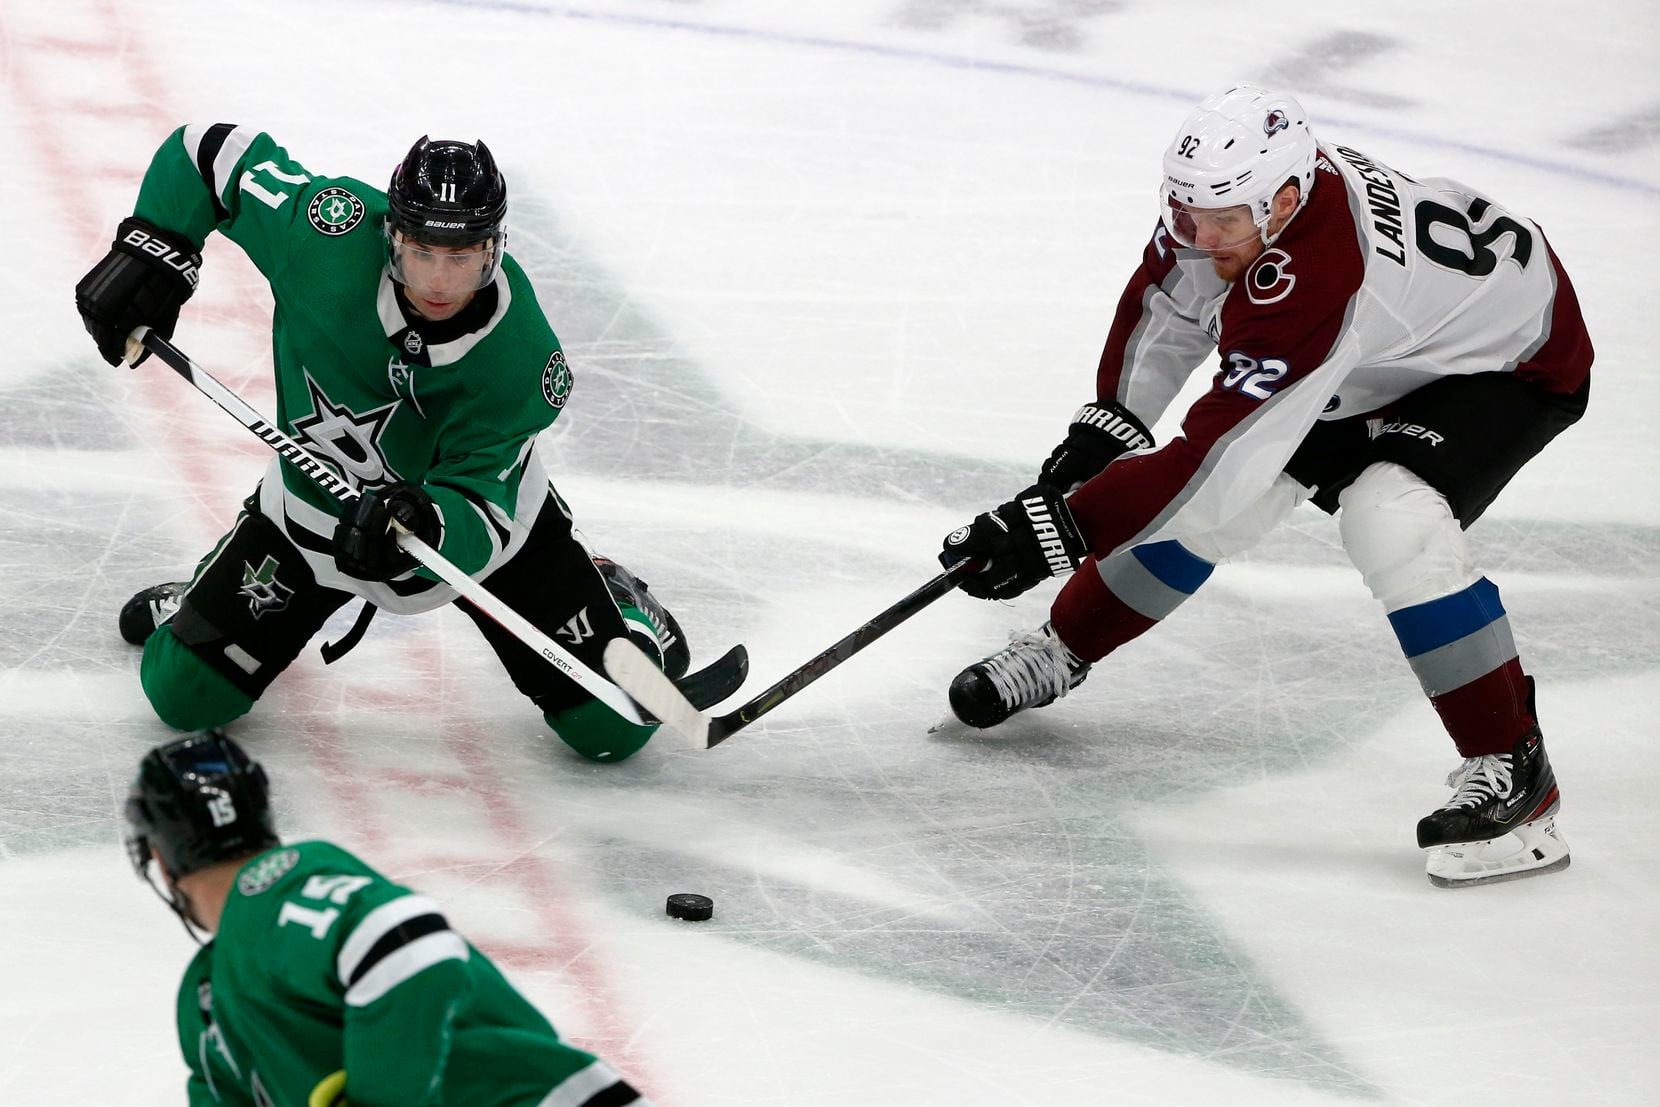 Dallas Stars center Andrew Cogliano (11) and Colorado Avalanche left wing Gabriel Landeskog (92) battle for the puck during the third period of an NHL hockey game in Dallas, Saturday, Dec. 28, 2019.